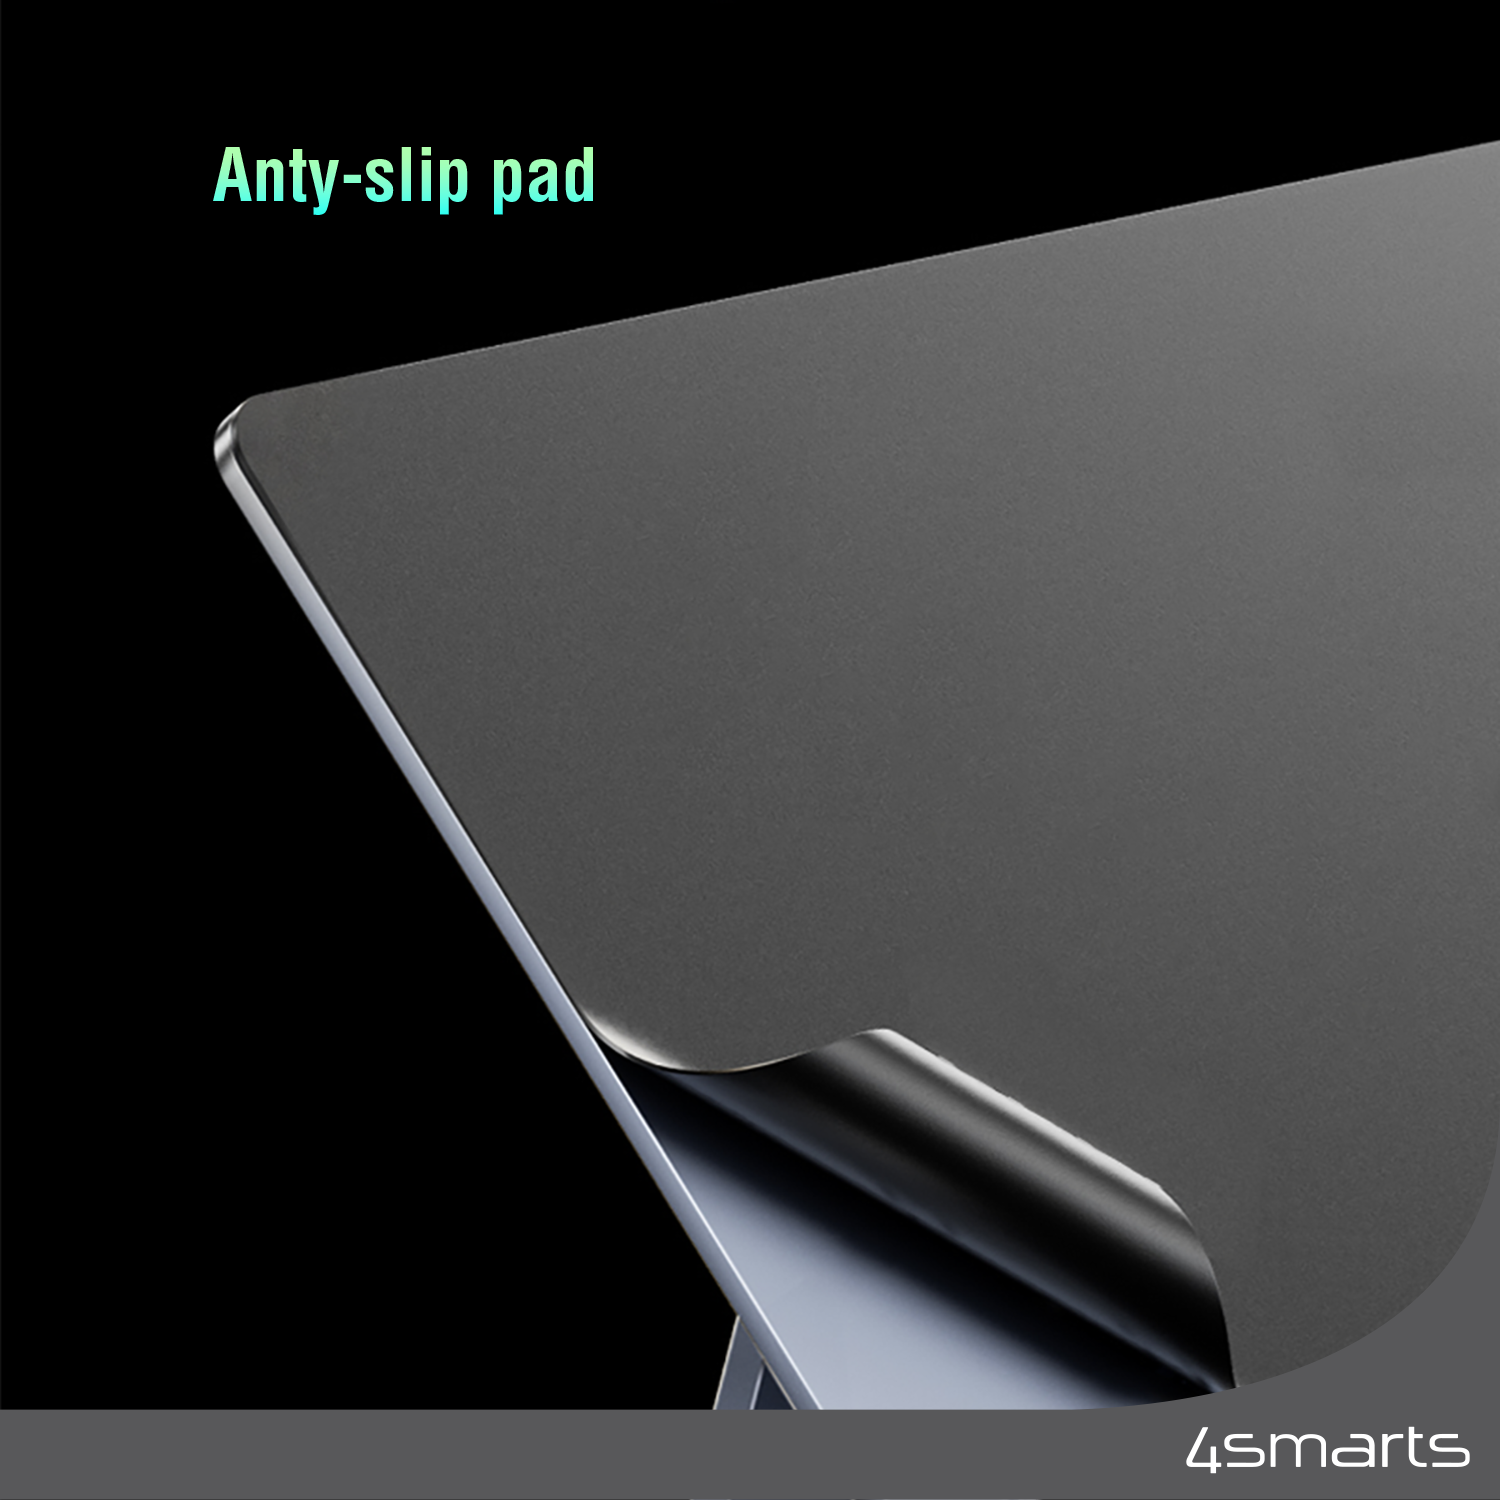 The anti-slip coating of your 4smarts tablet stand ensures that your Apple iPad (10th generation) is held securely and stably.